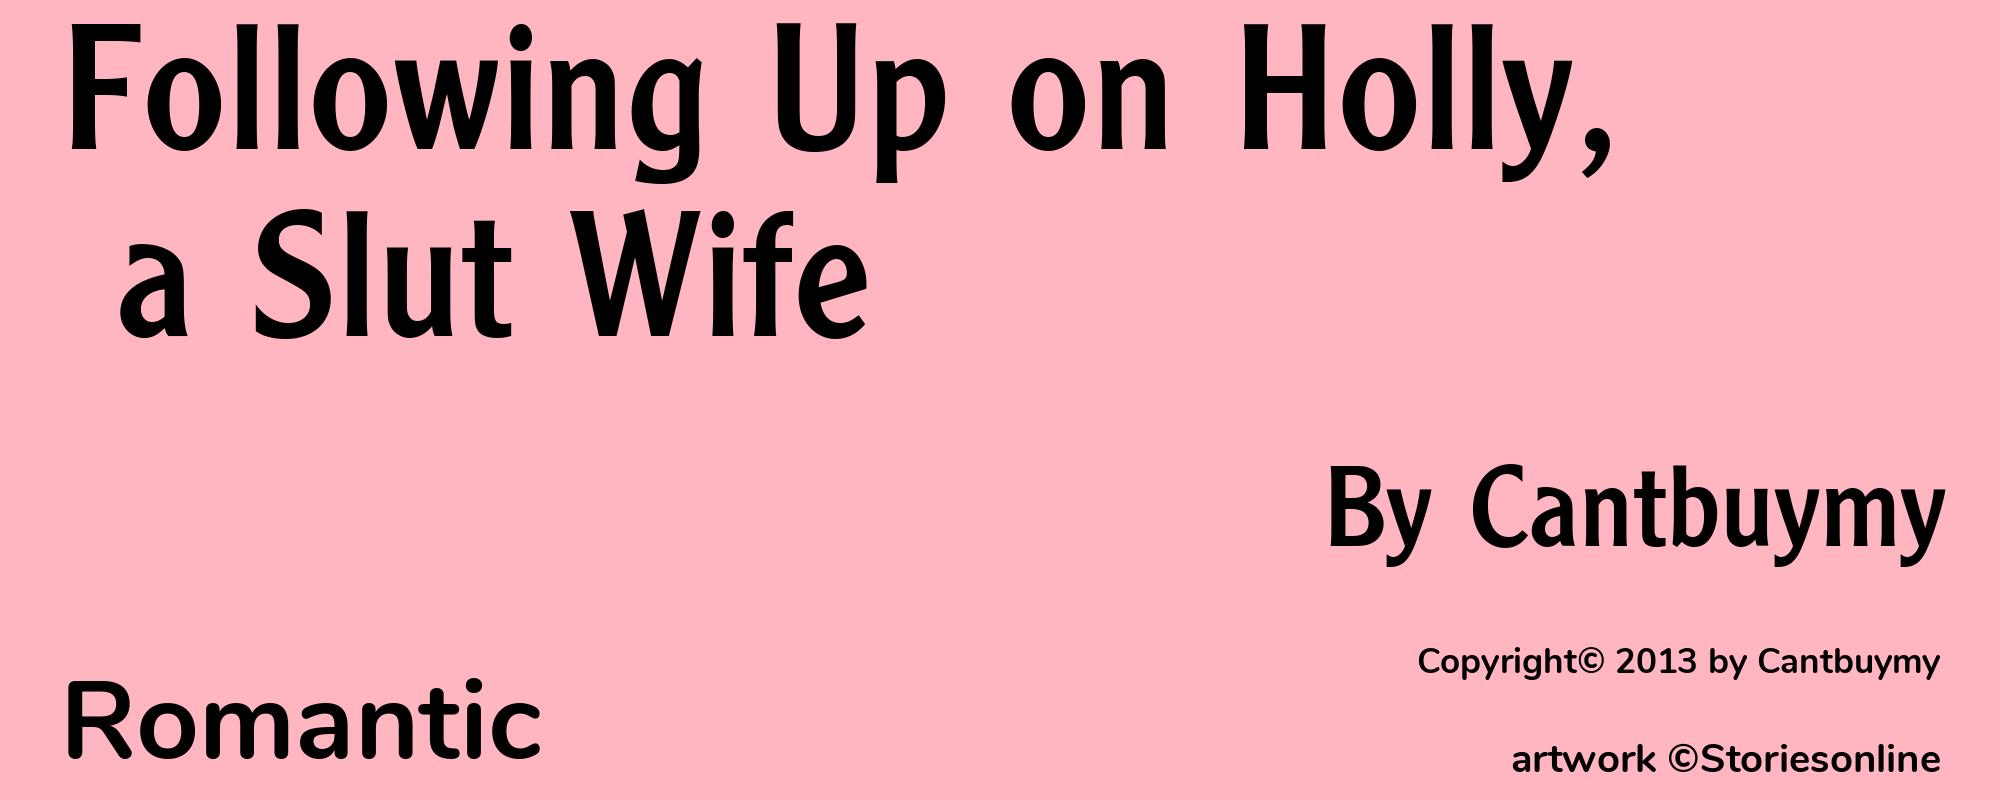 Following Up on Holly, a Slut Wife - Cover